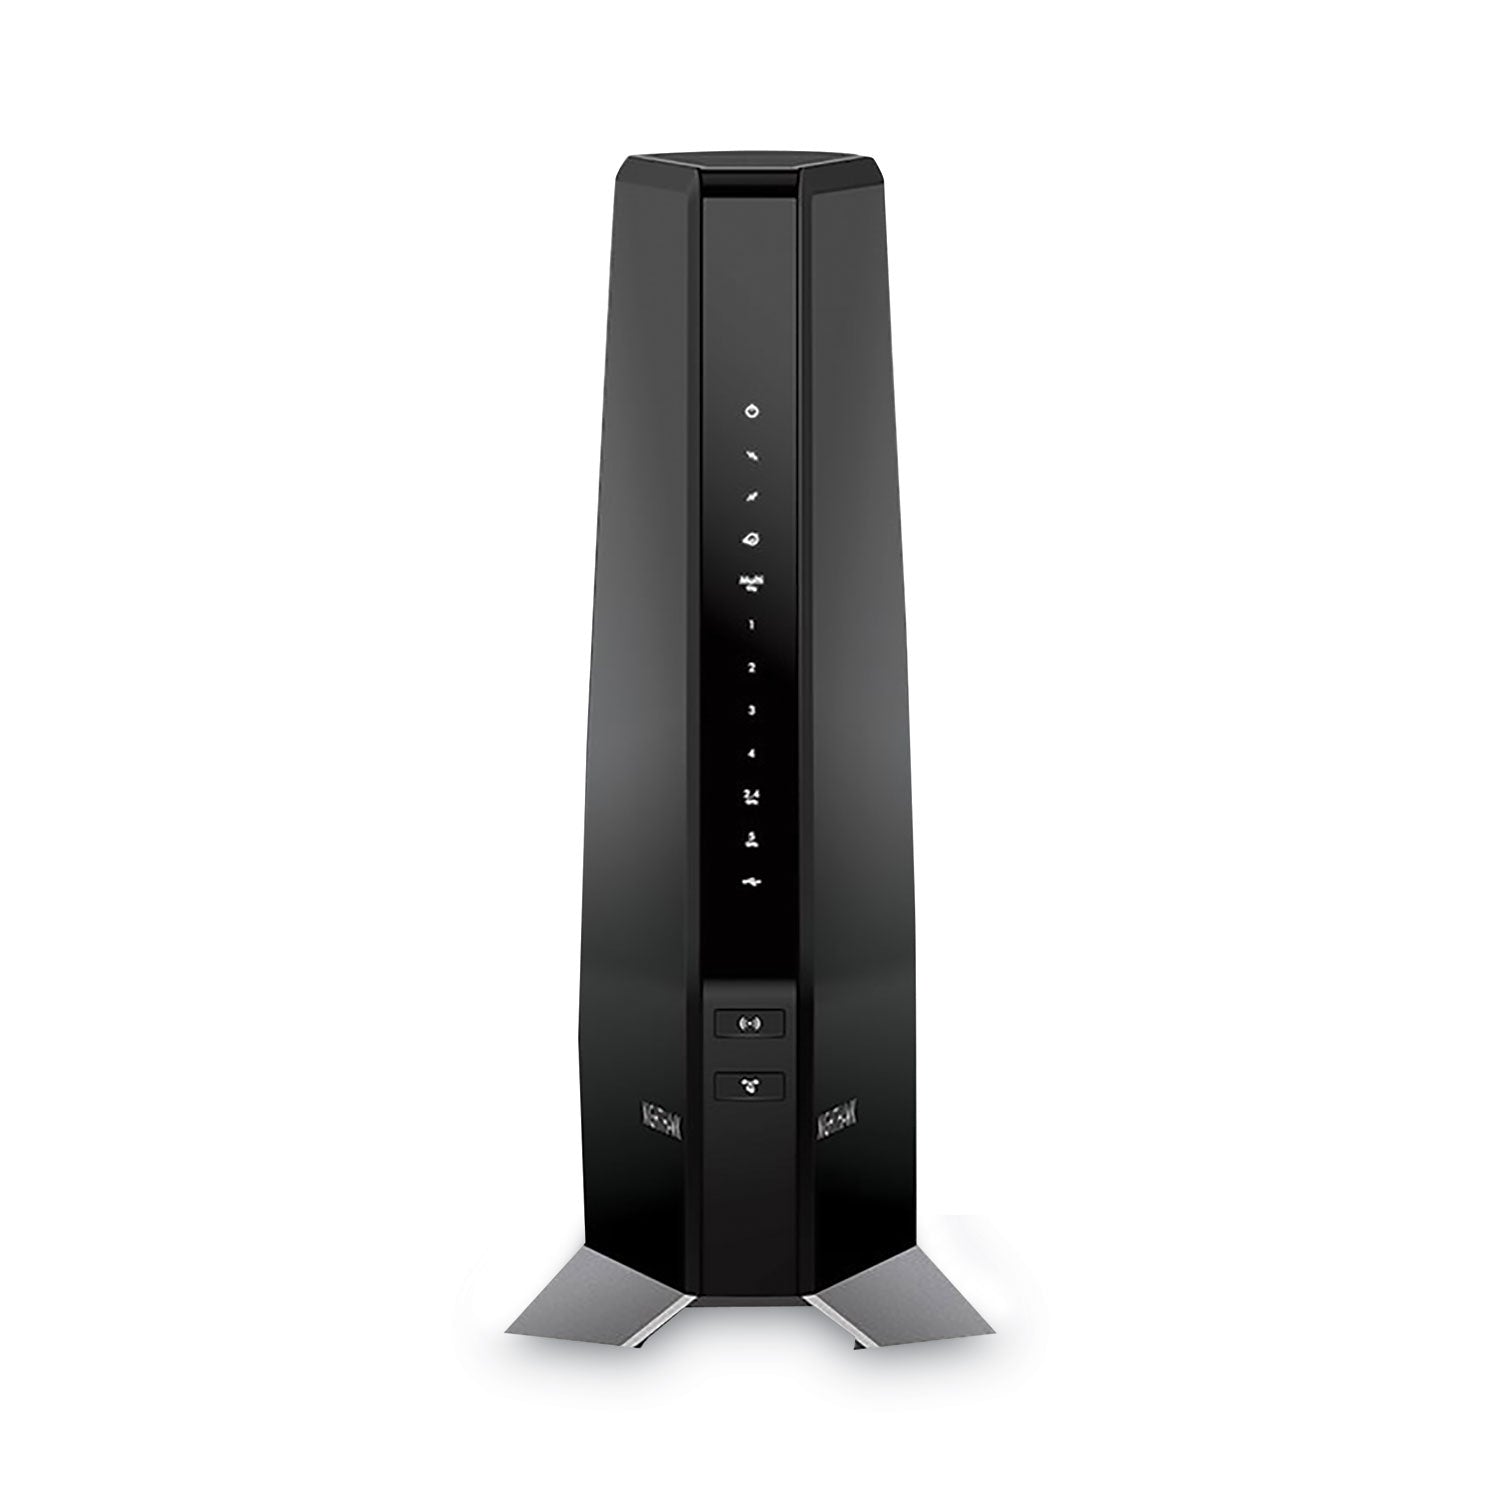 nighthawk-ax6000-dual-band-wi-fi-cable-modem-router-4-ports-dual-band-24-ghz-5-ghz_ngrcax80100nas - 1